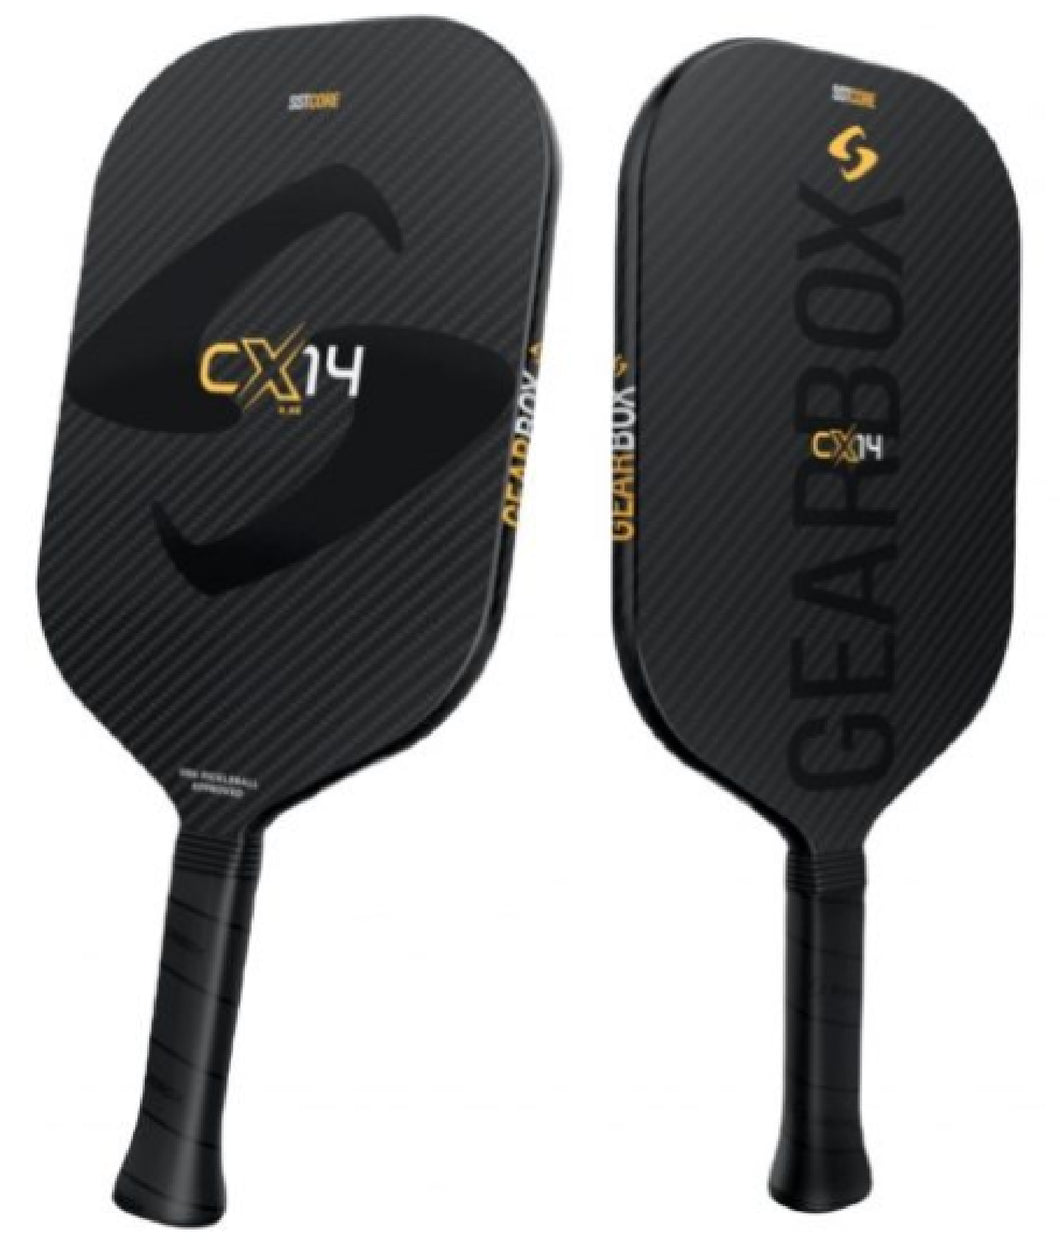 SALE! 1 left! Gearbox CX14E 14mm elongated solid carbon pickleball paddle - no honeycomb!